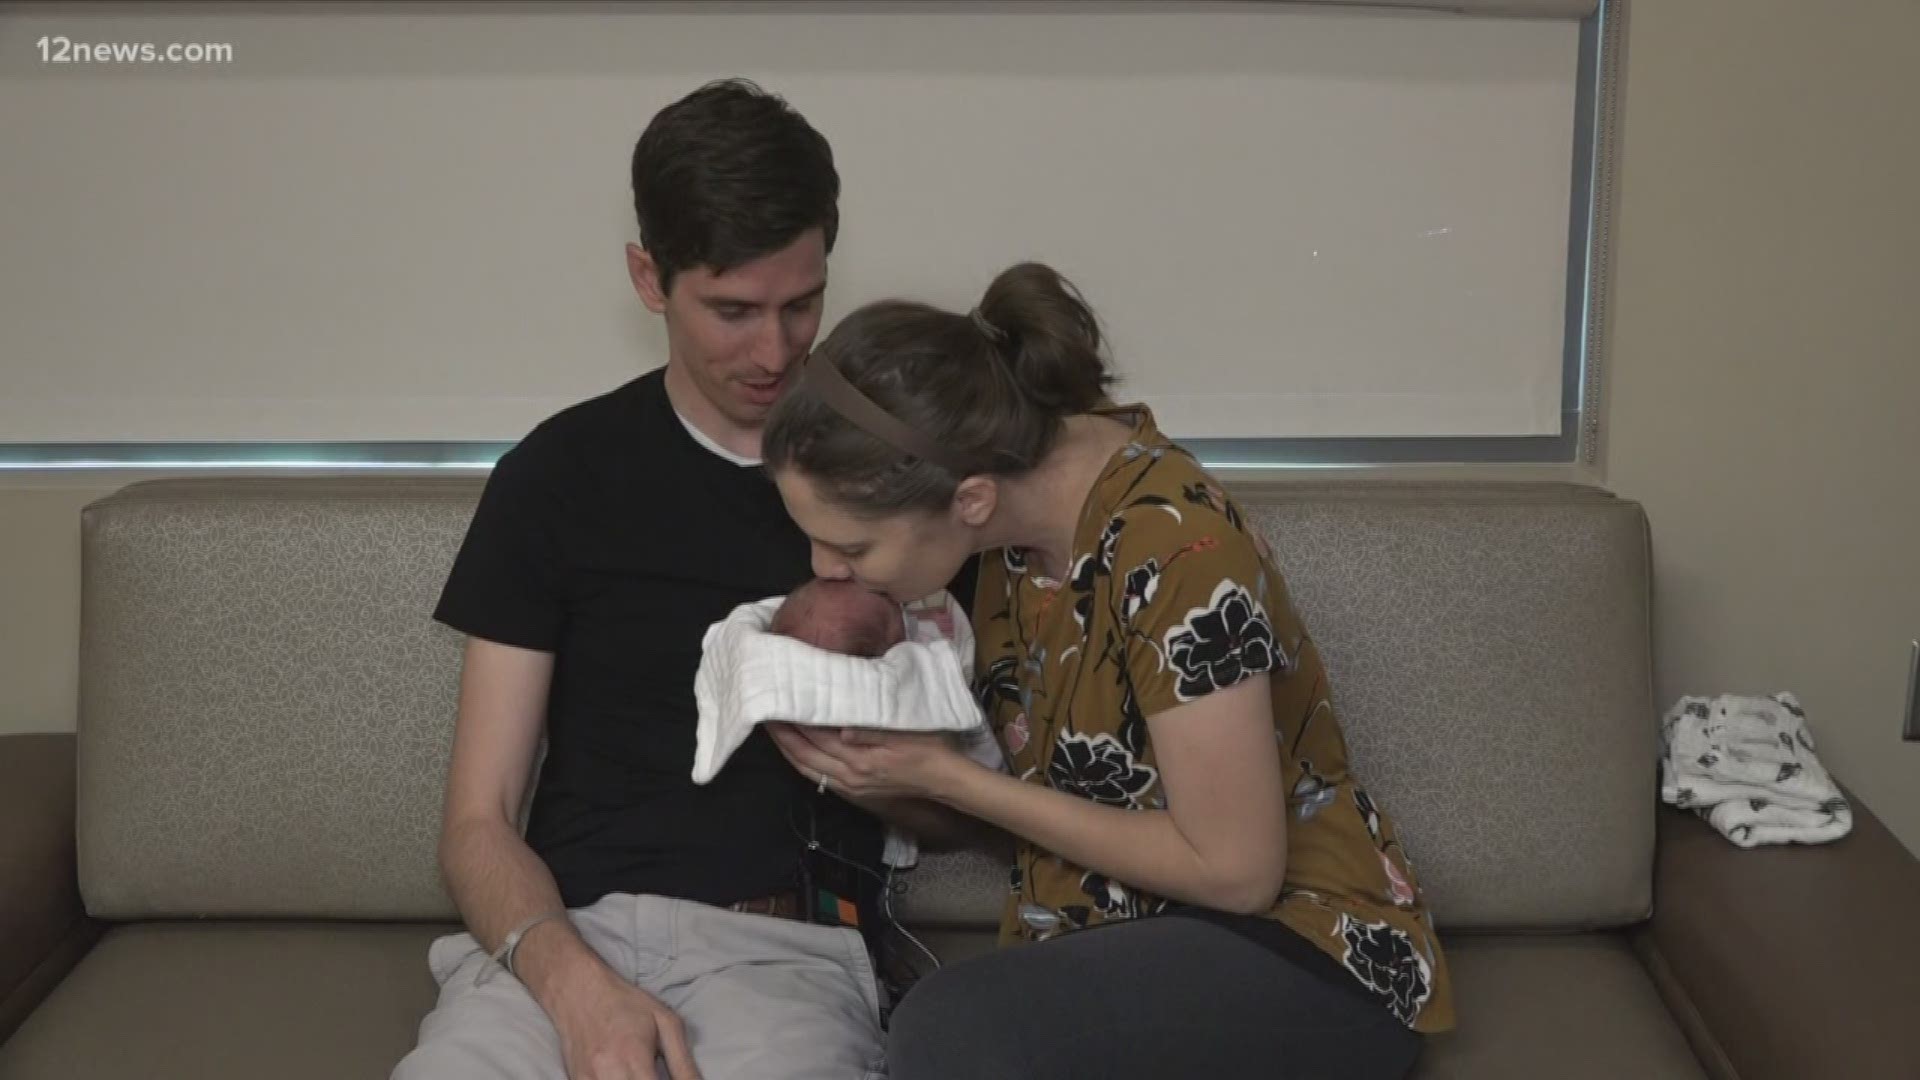 It was an extra special first Father’s Day for an East Valley dad, who got to take his baby girl home from the hospital for the very first time.